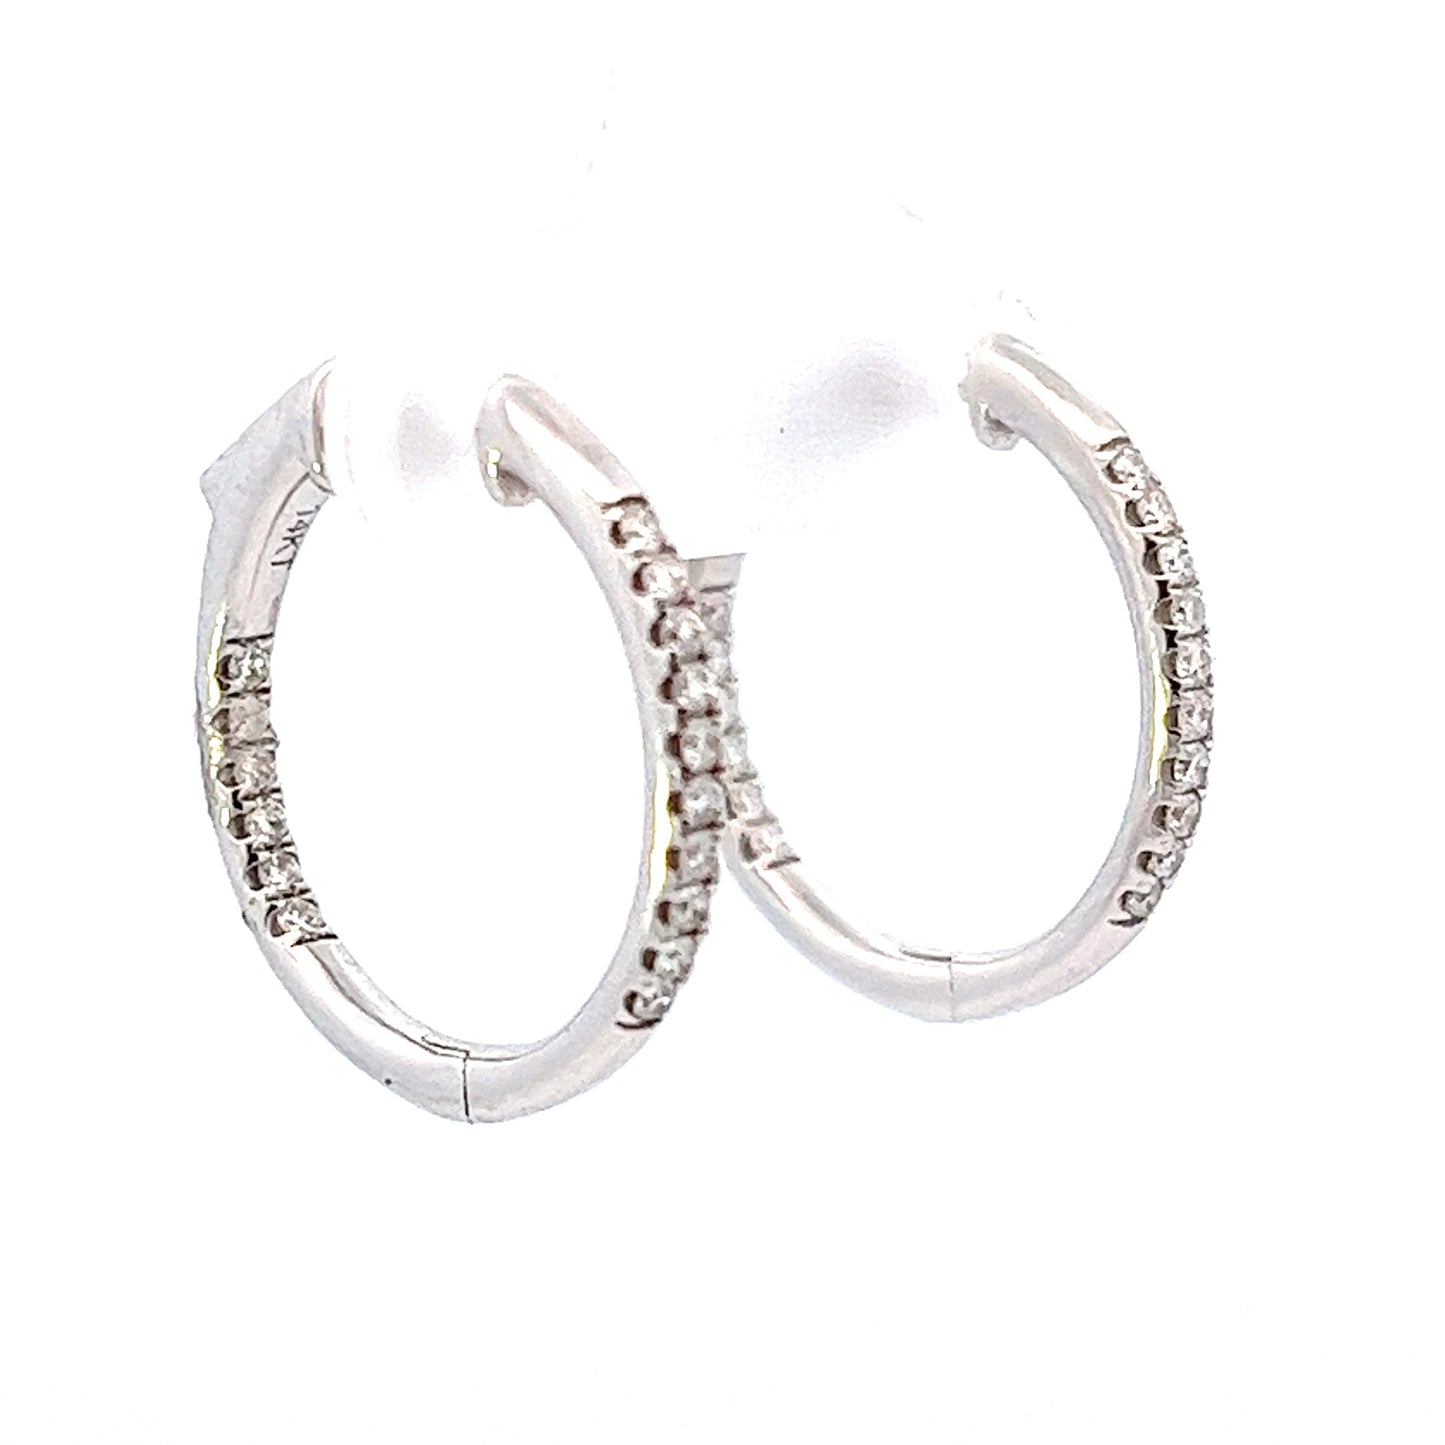 14k White Gold 0.25ct Total Weight Pave Diamond Hoop Earrings